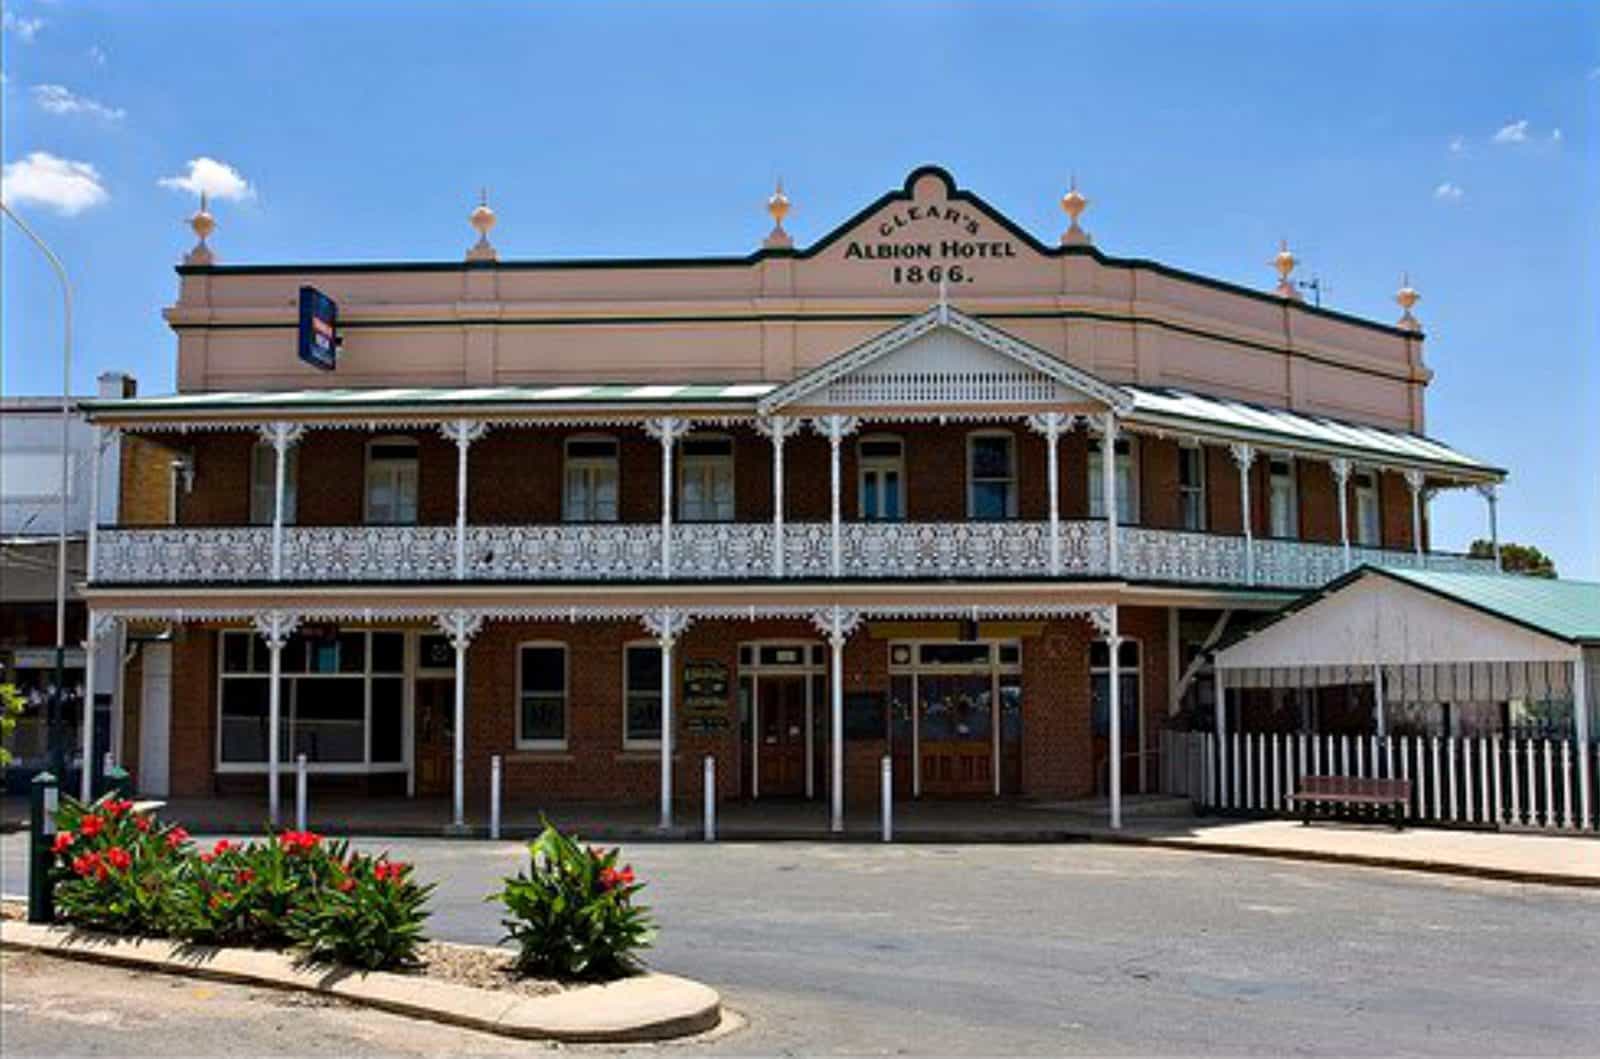 The Albion Hotel Grenfell